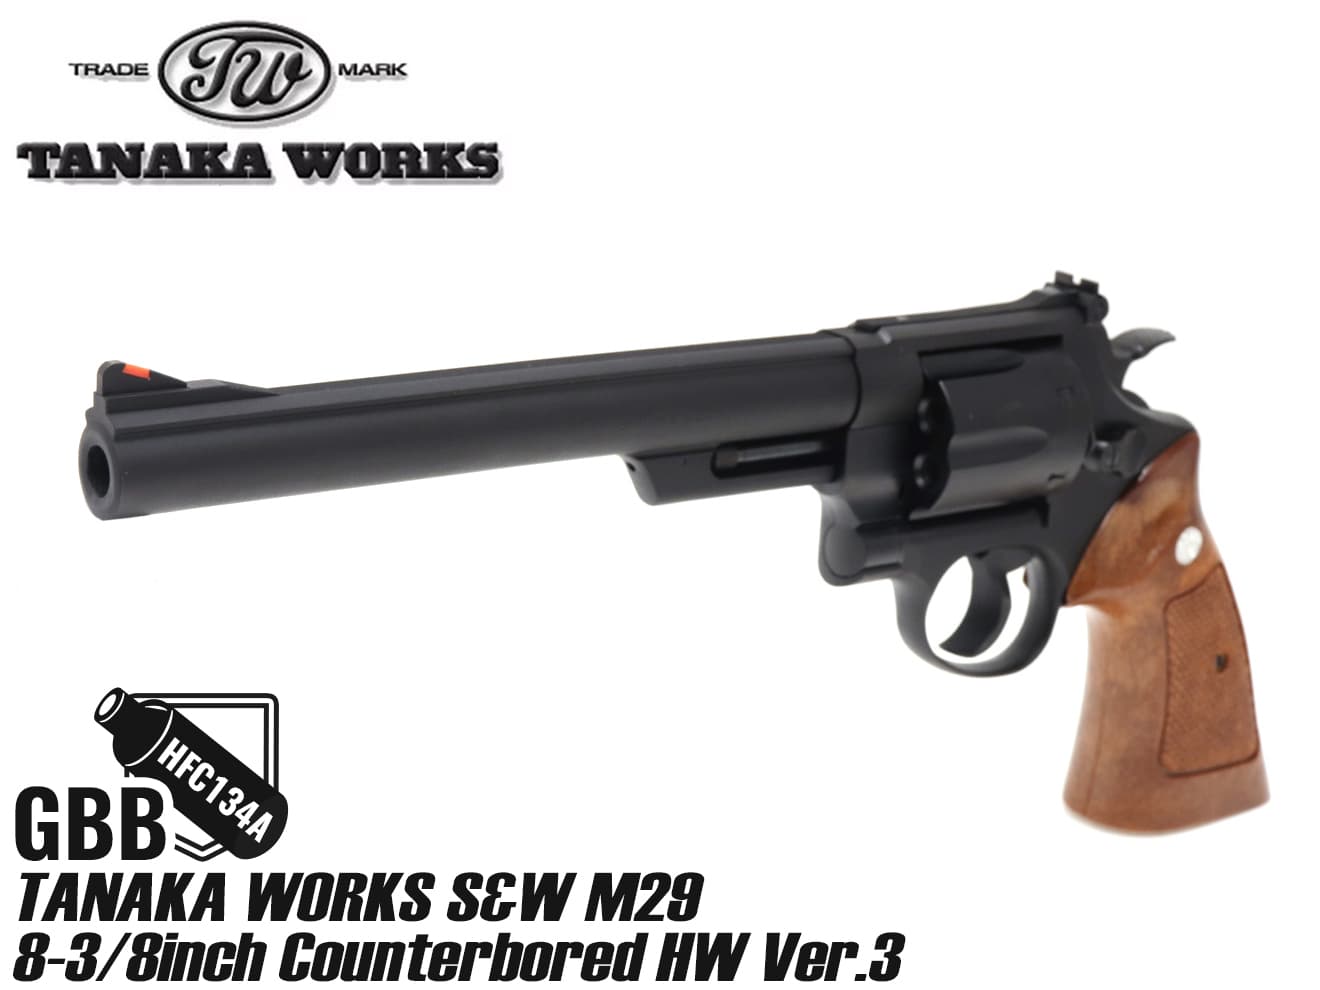 TANAKA WORKS ガスリボルバー S&W M29 8 3/8inch Counterbored HW Ver 